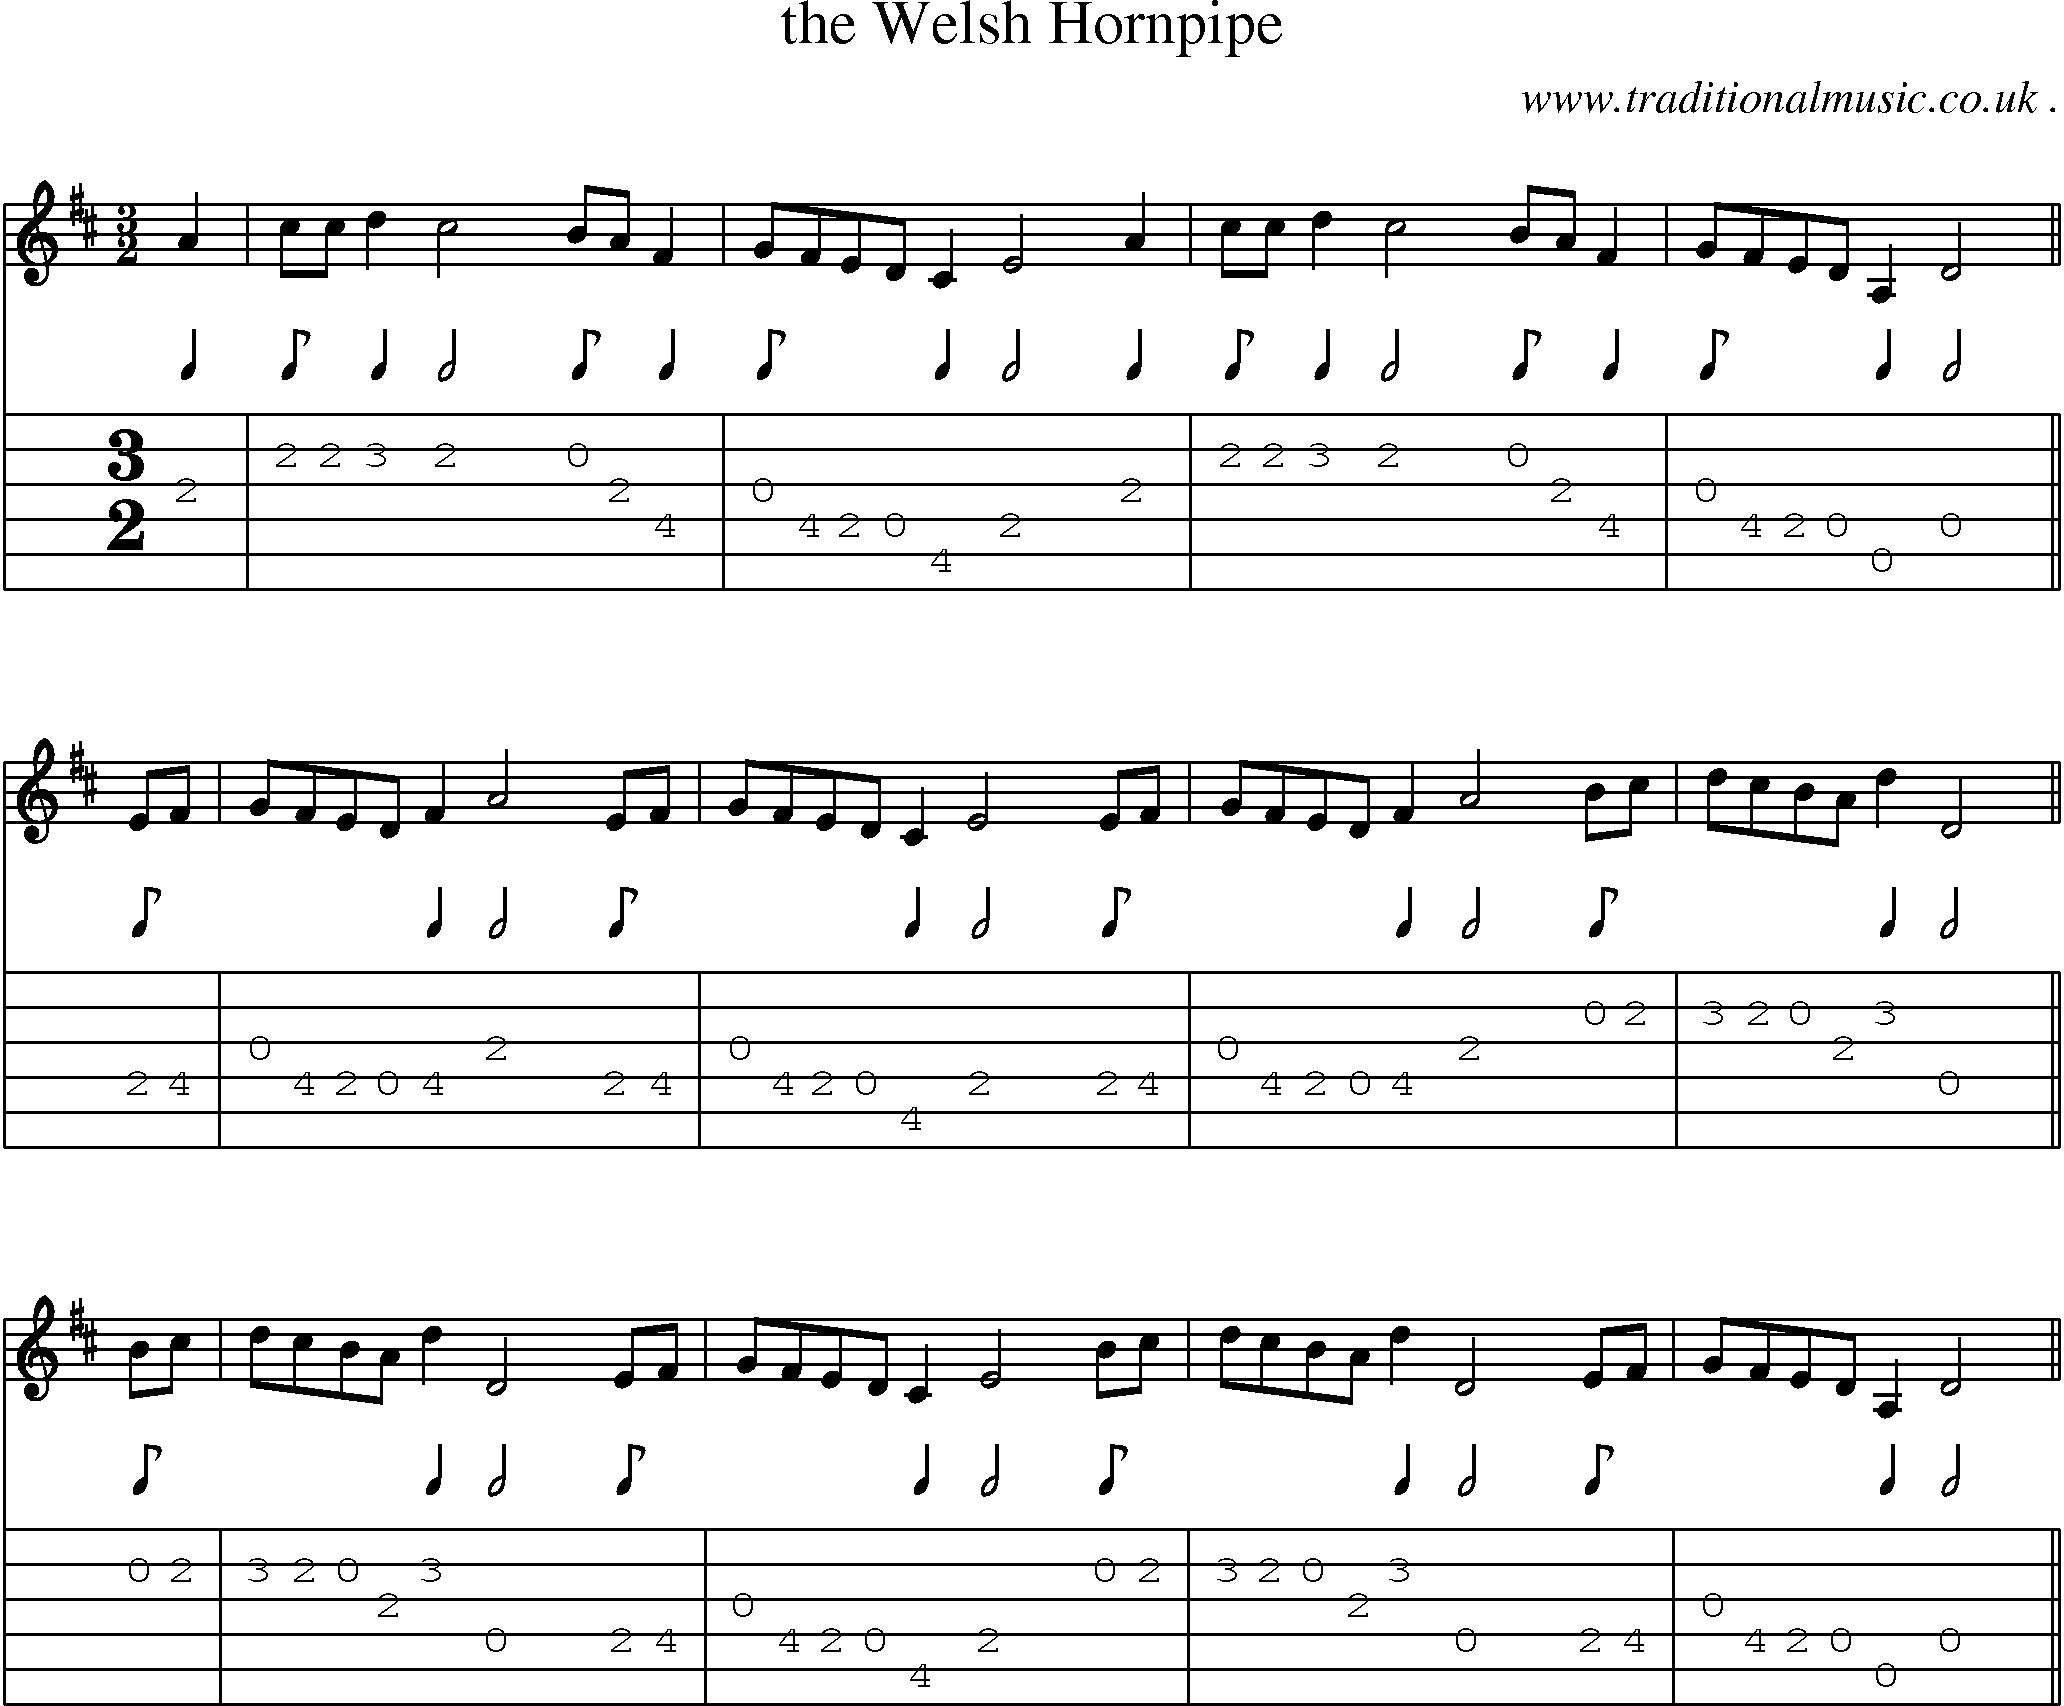 Sheet-Music and Guitar Tabs for The Welsh Hornpipe